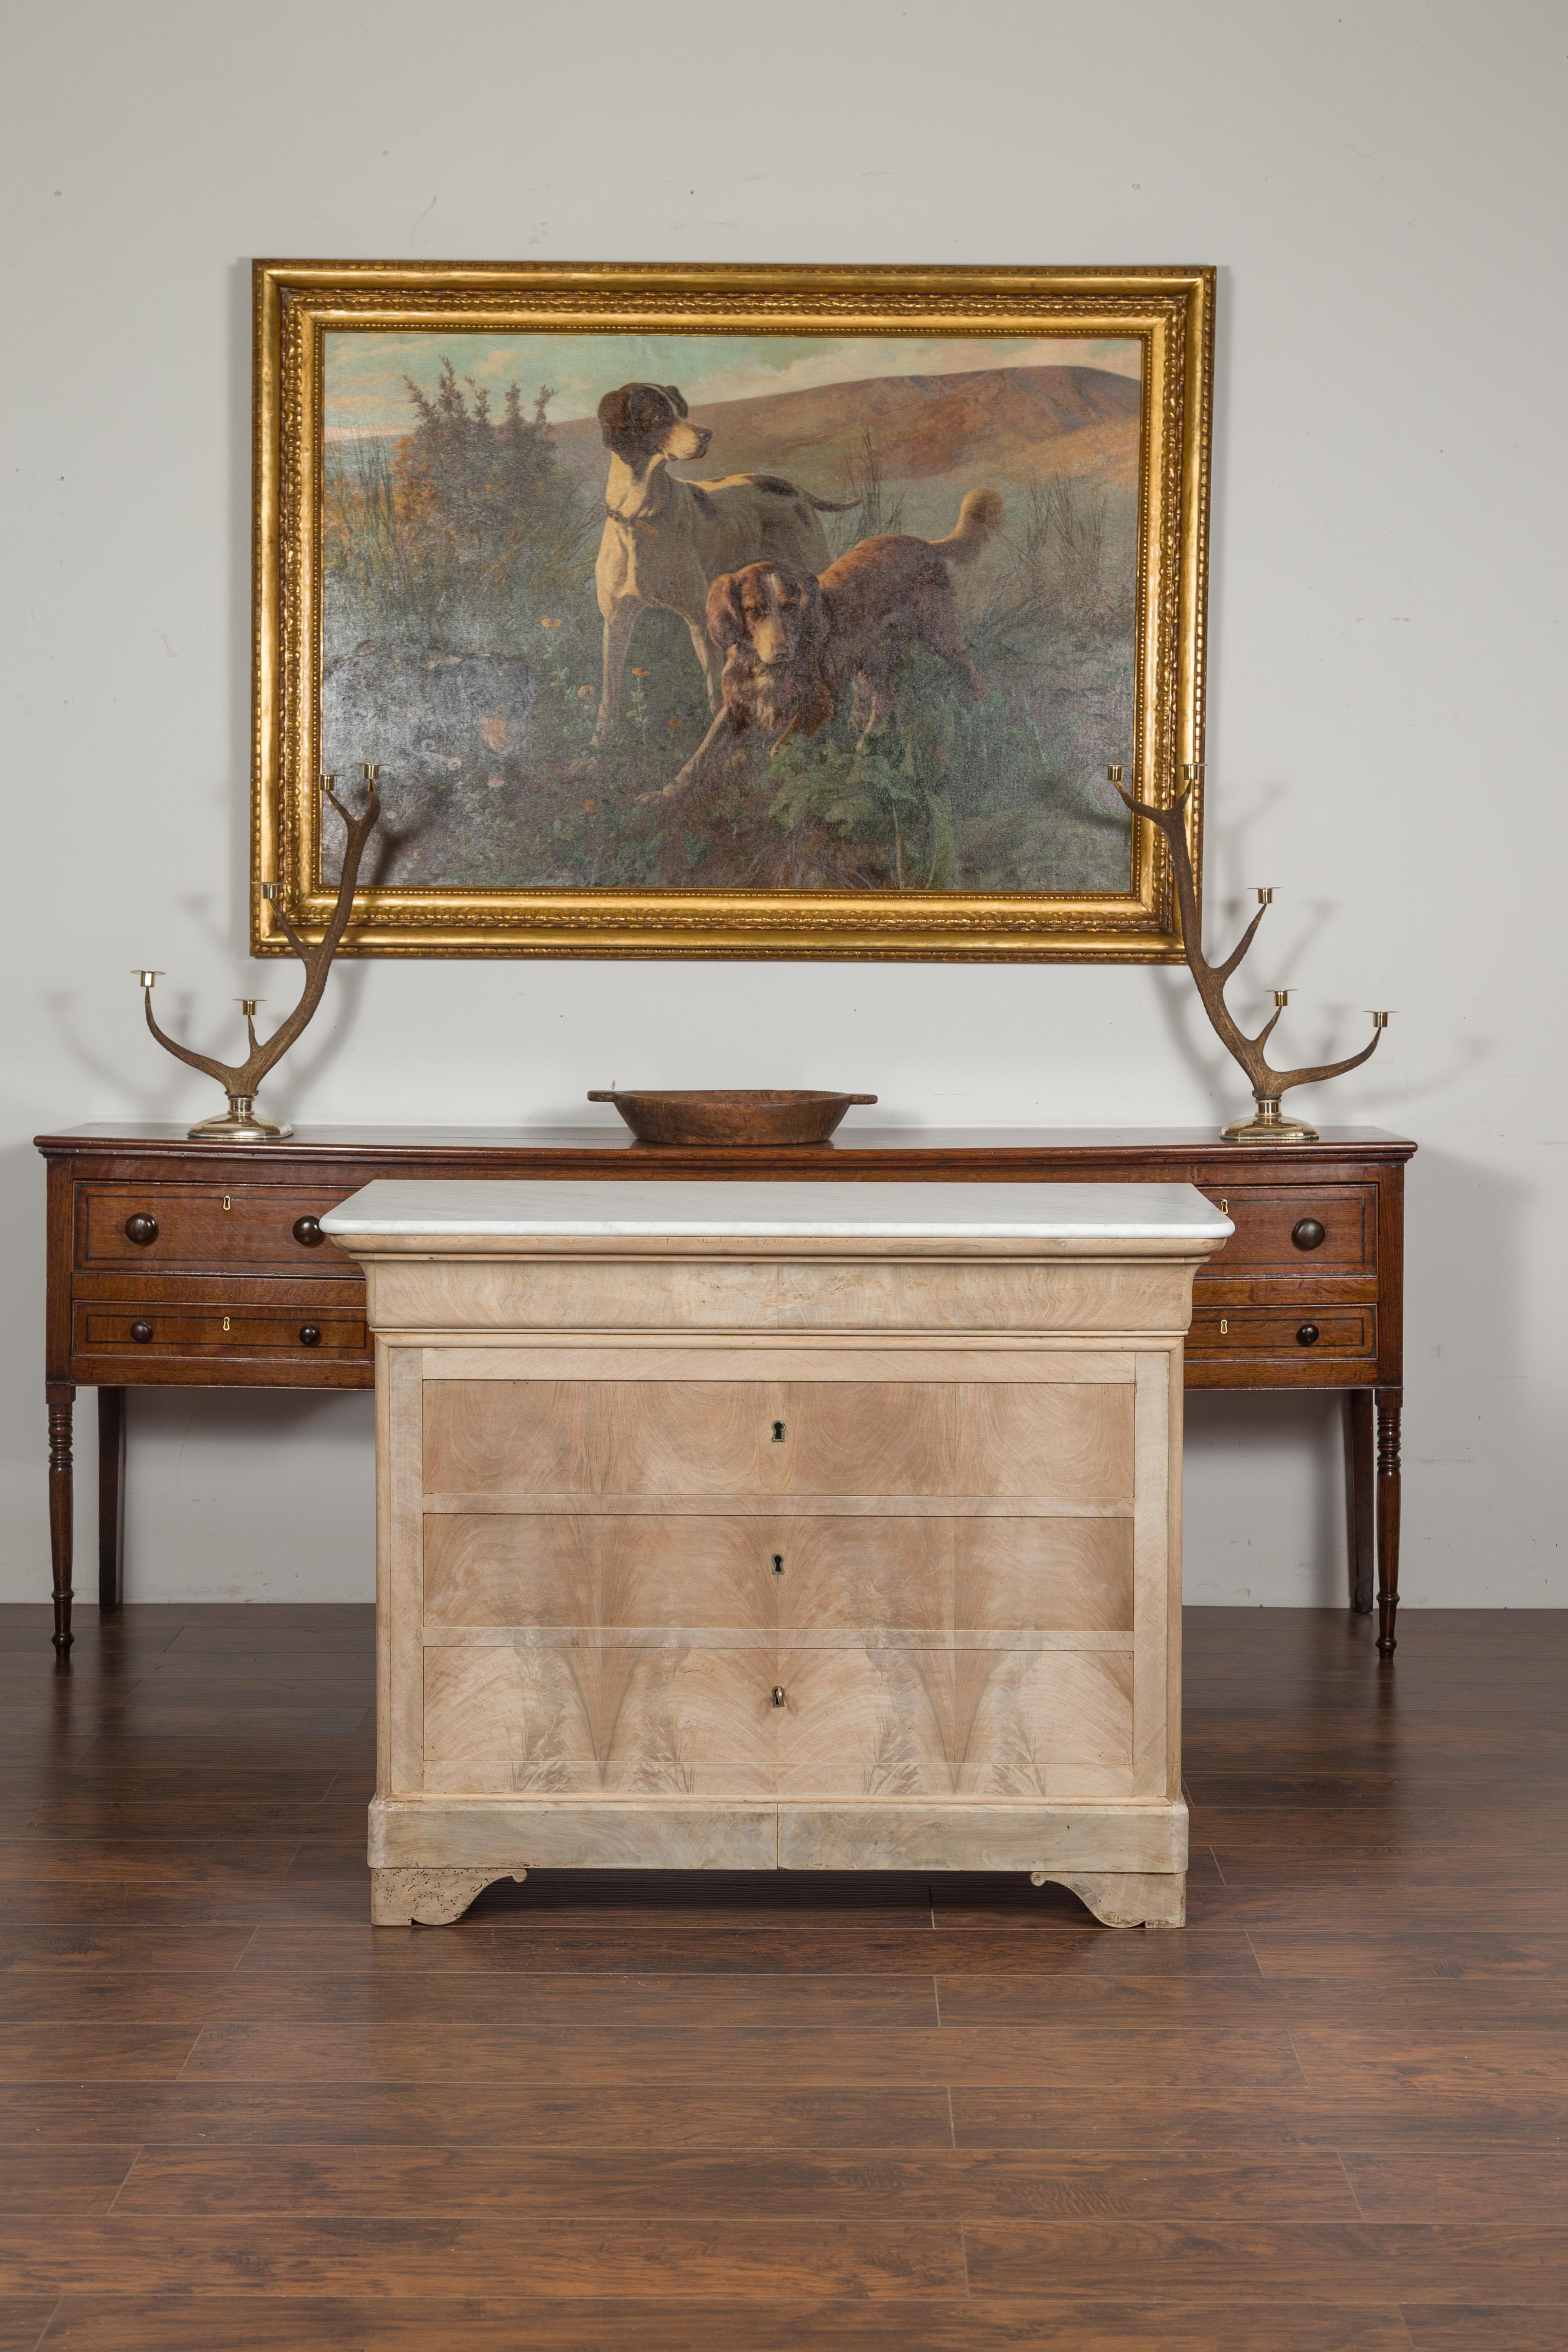 A French Louis-Philippe style bleached wood commode from the late 19th century, with new white marble top and four drawers. Born in France during the third quarter of the 19th century, this Louis-Philippe style commode features a rectangular white